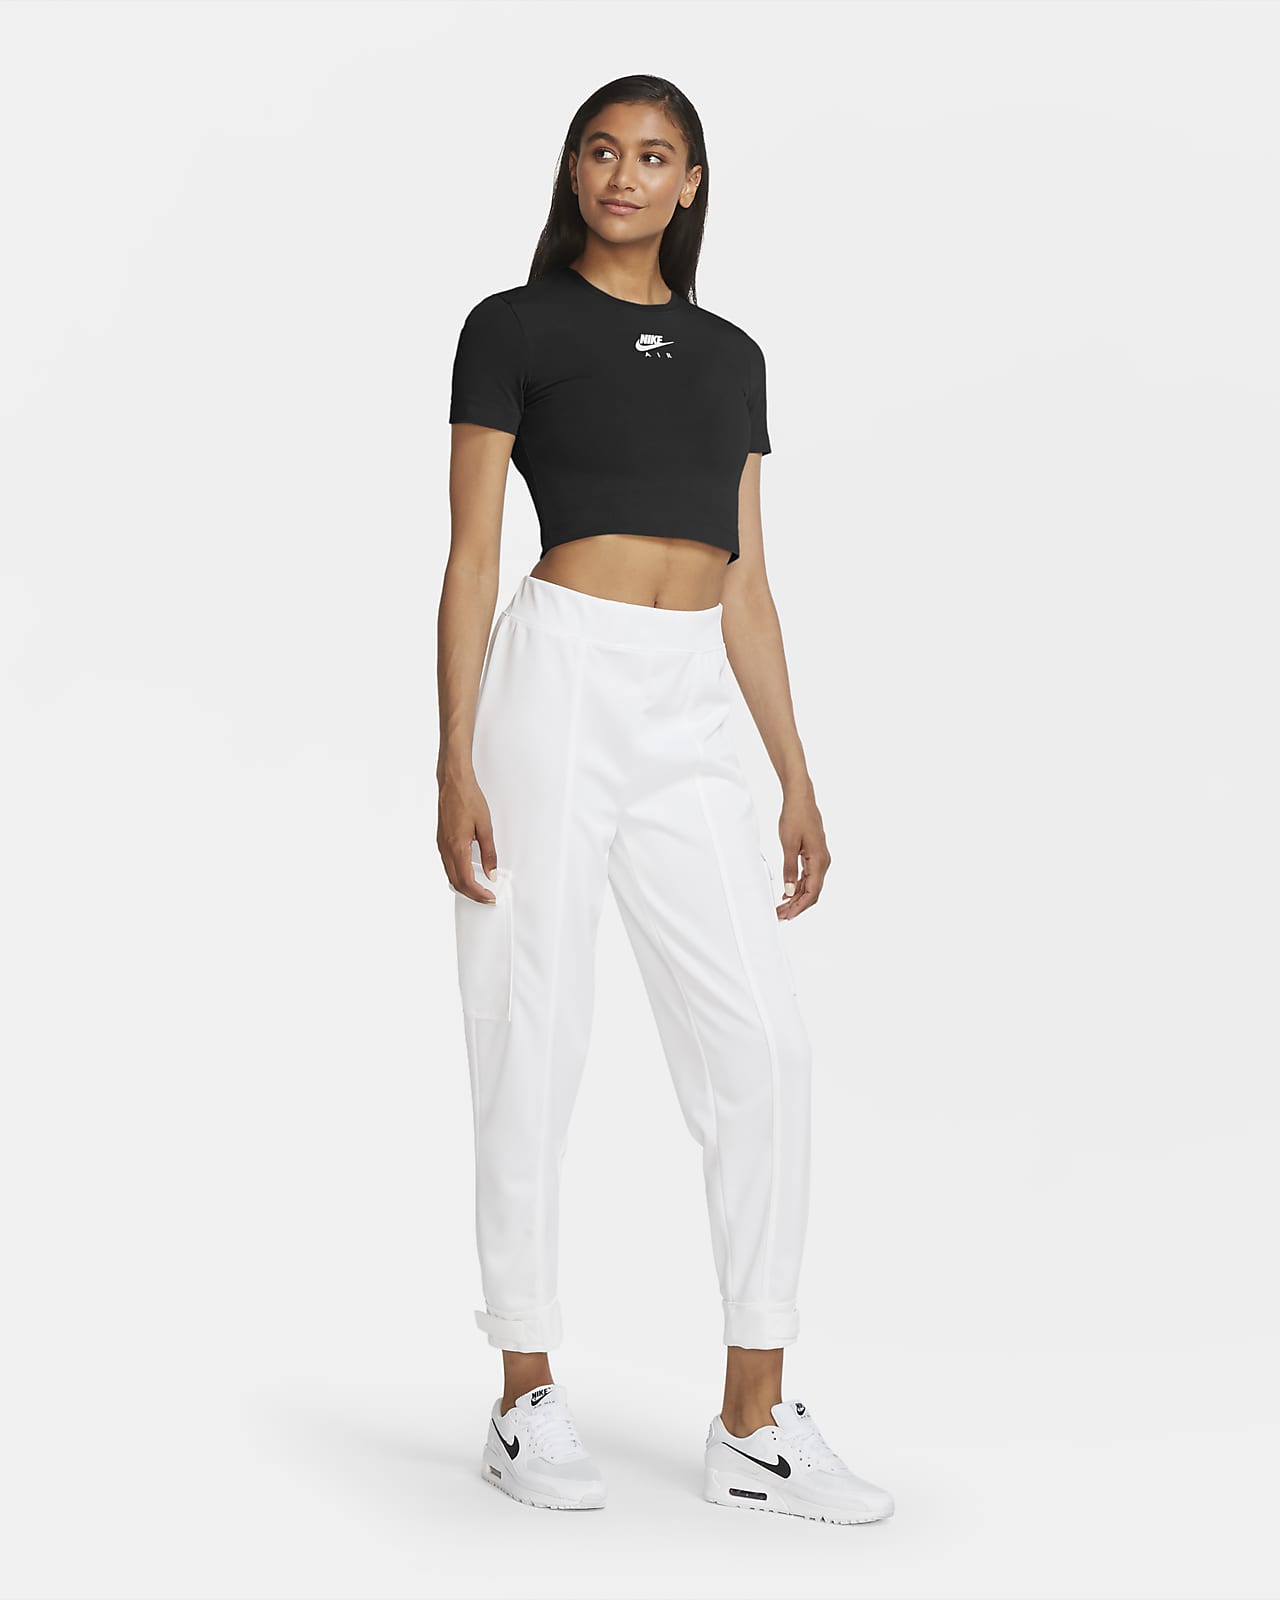 black and white nike crop top